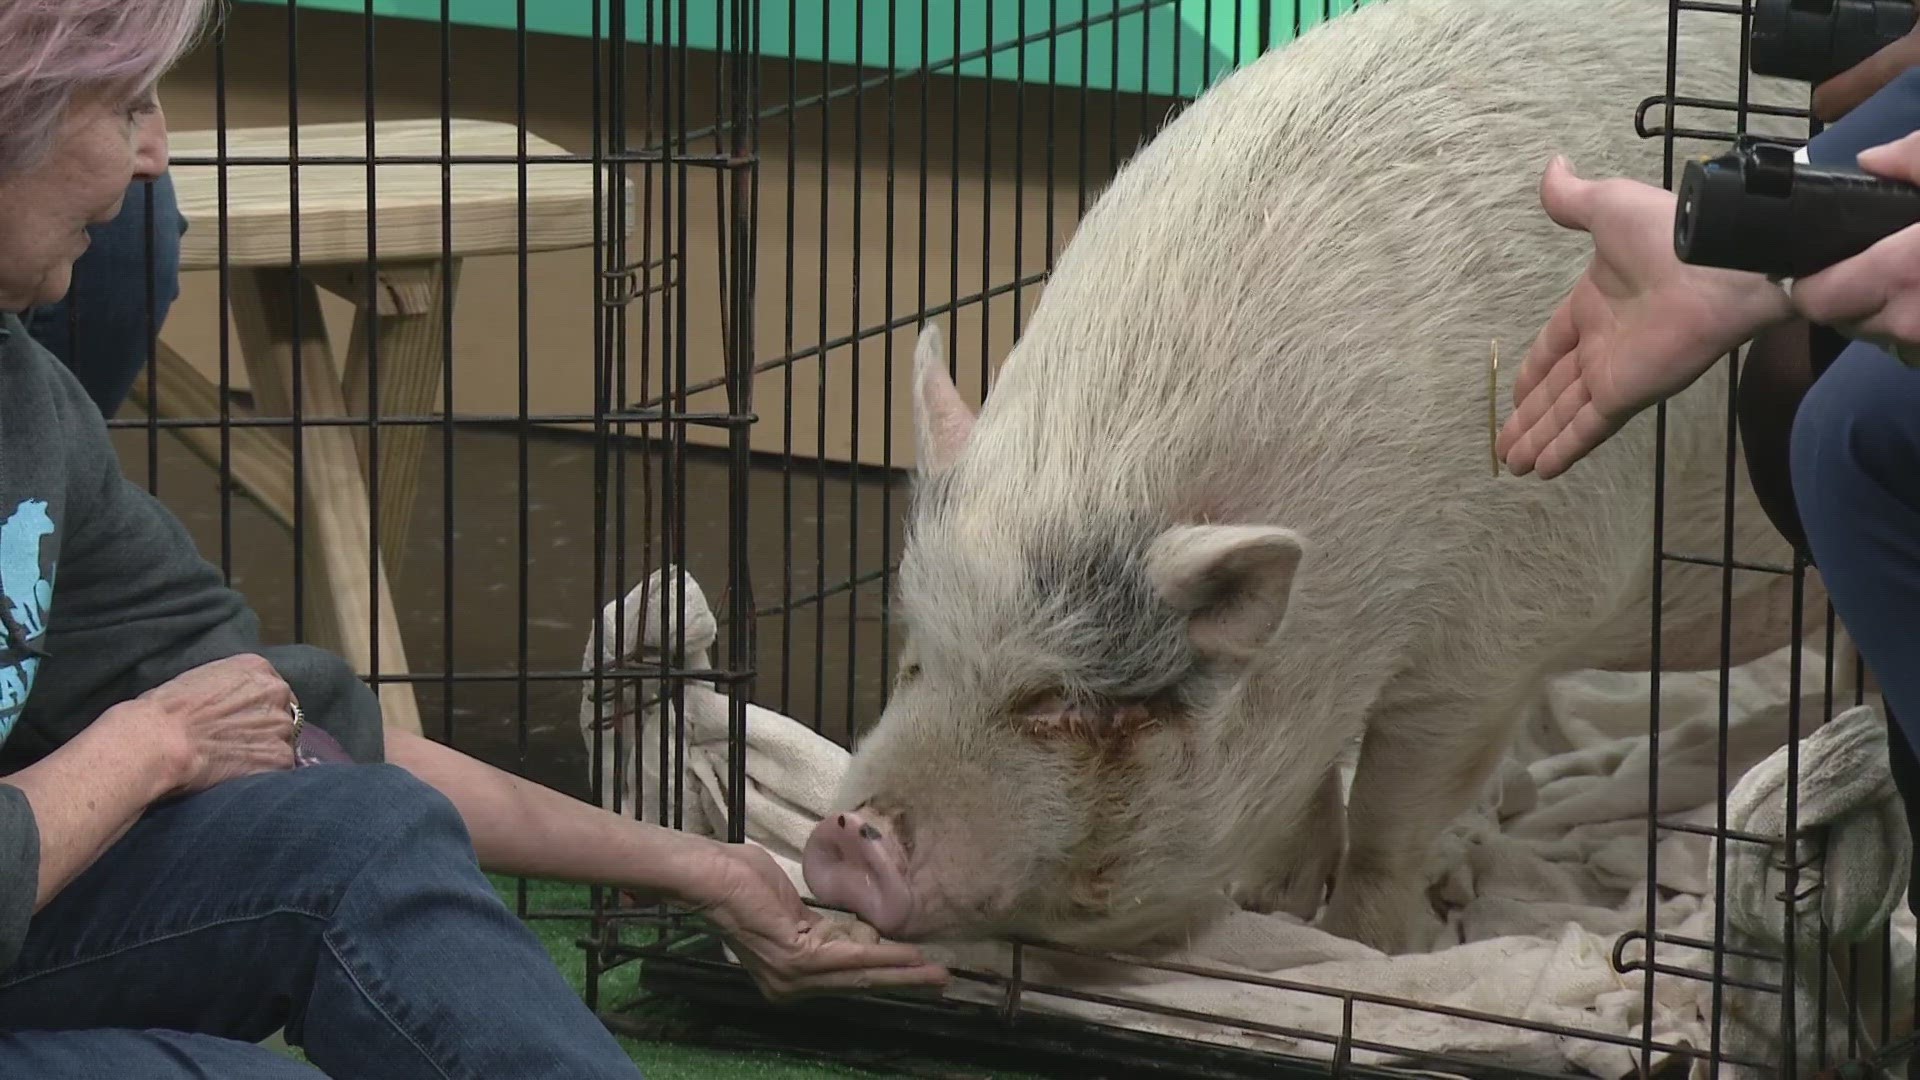 Holly the pig from Happy Trails Farm Animal Sanctuary is up for adoption